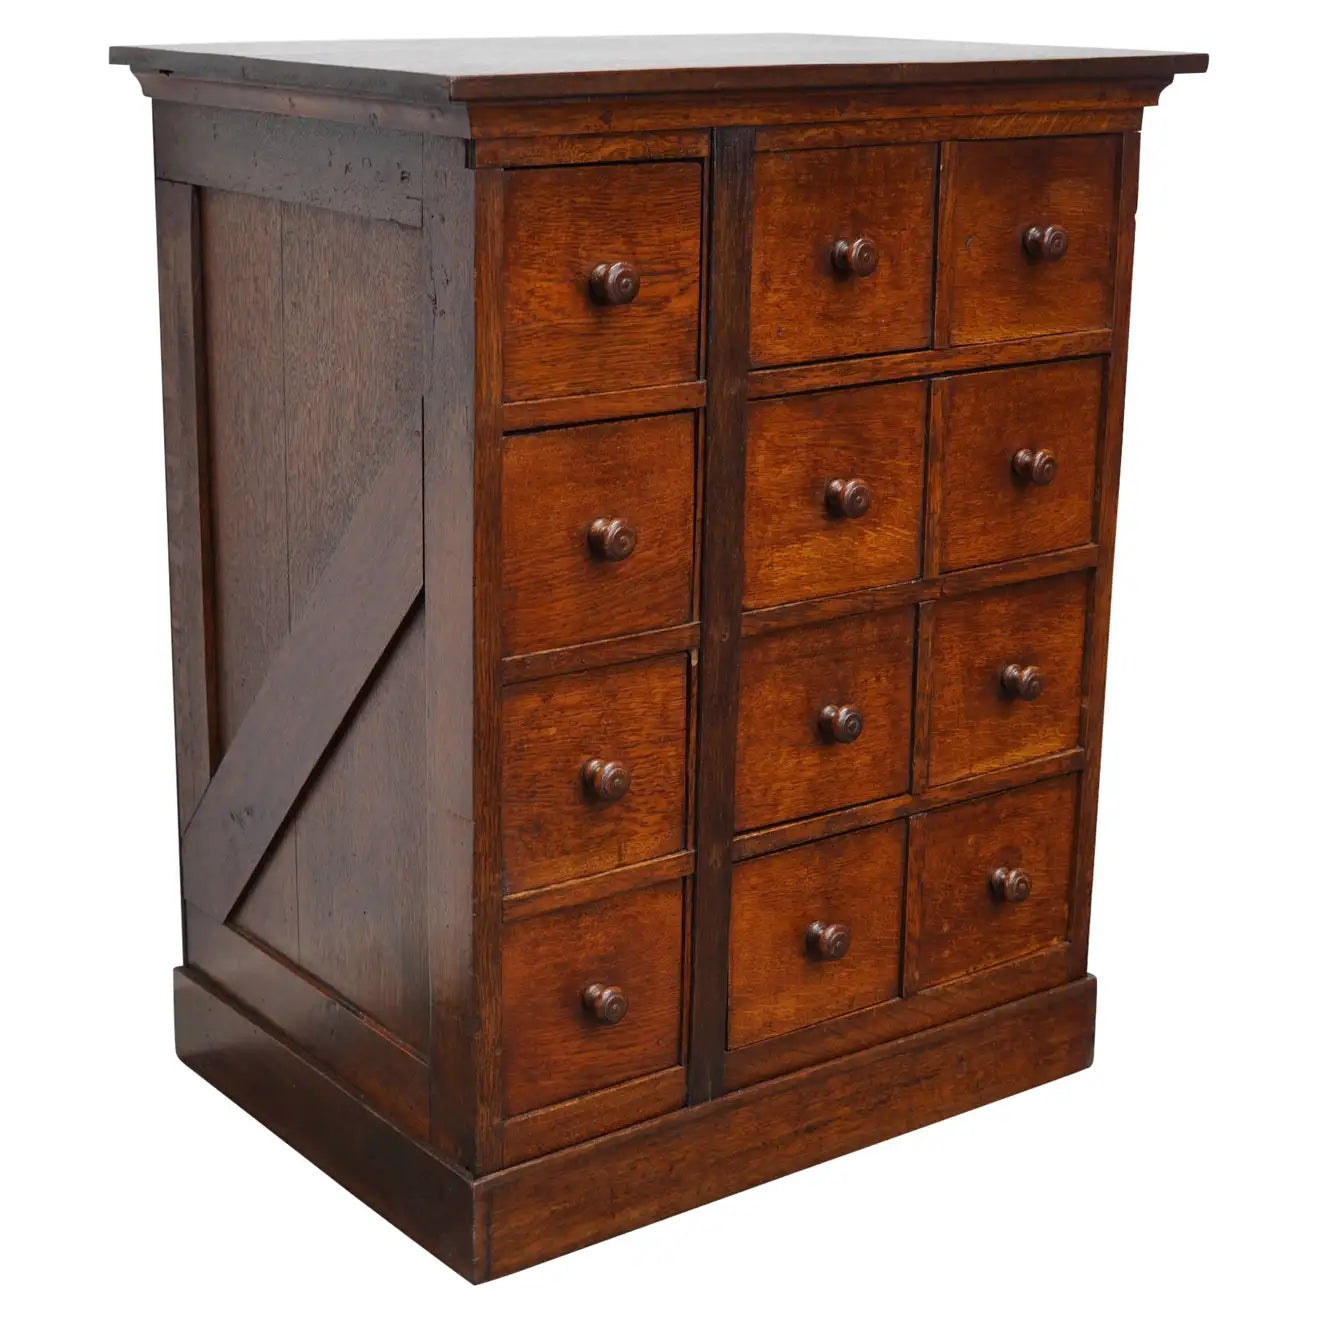 English Oak Apothecary Cabinet Cabinet, Early 20th Century